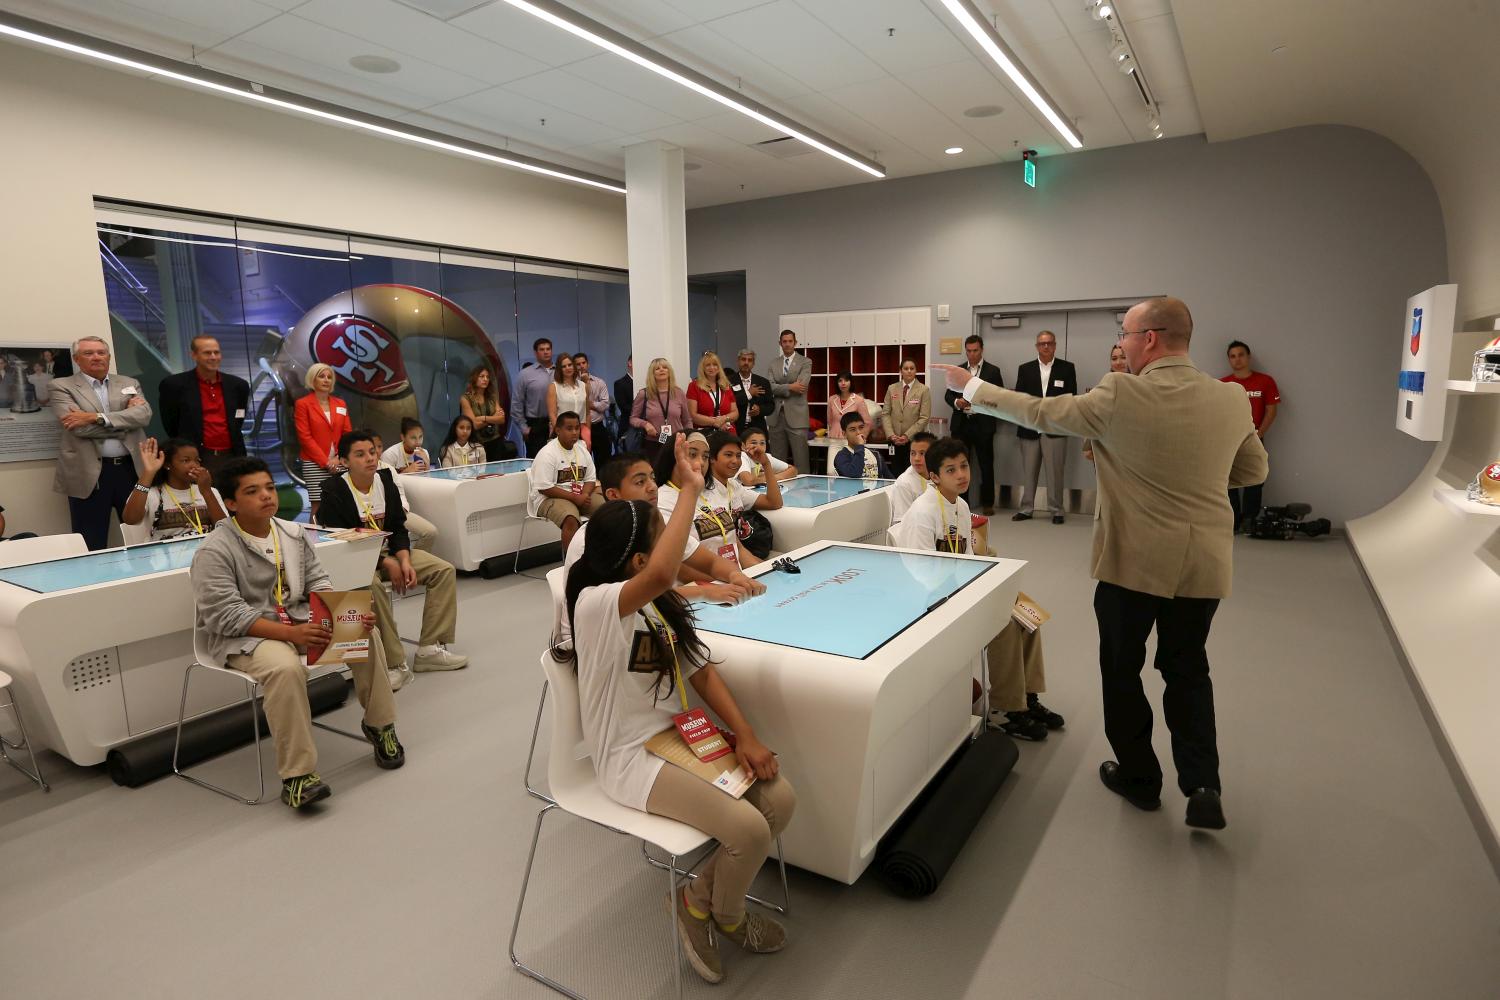 Students receive instructions from teacher Matt Van Dixon while sitting at interactive video tables made by Cortina Productions at the 49ers STEM Leadership Institute at Levi's Stadium (Terrell Lloyd / San Francisco 49ers)